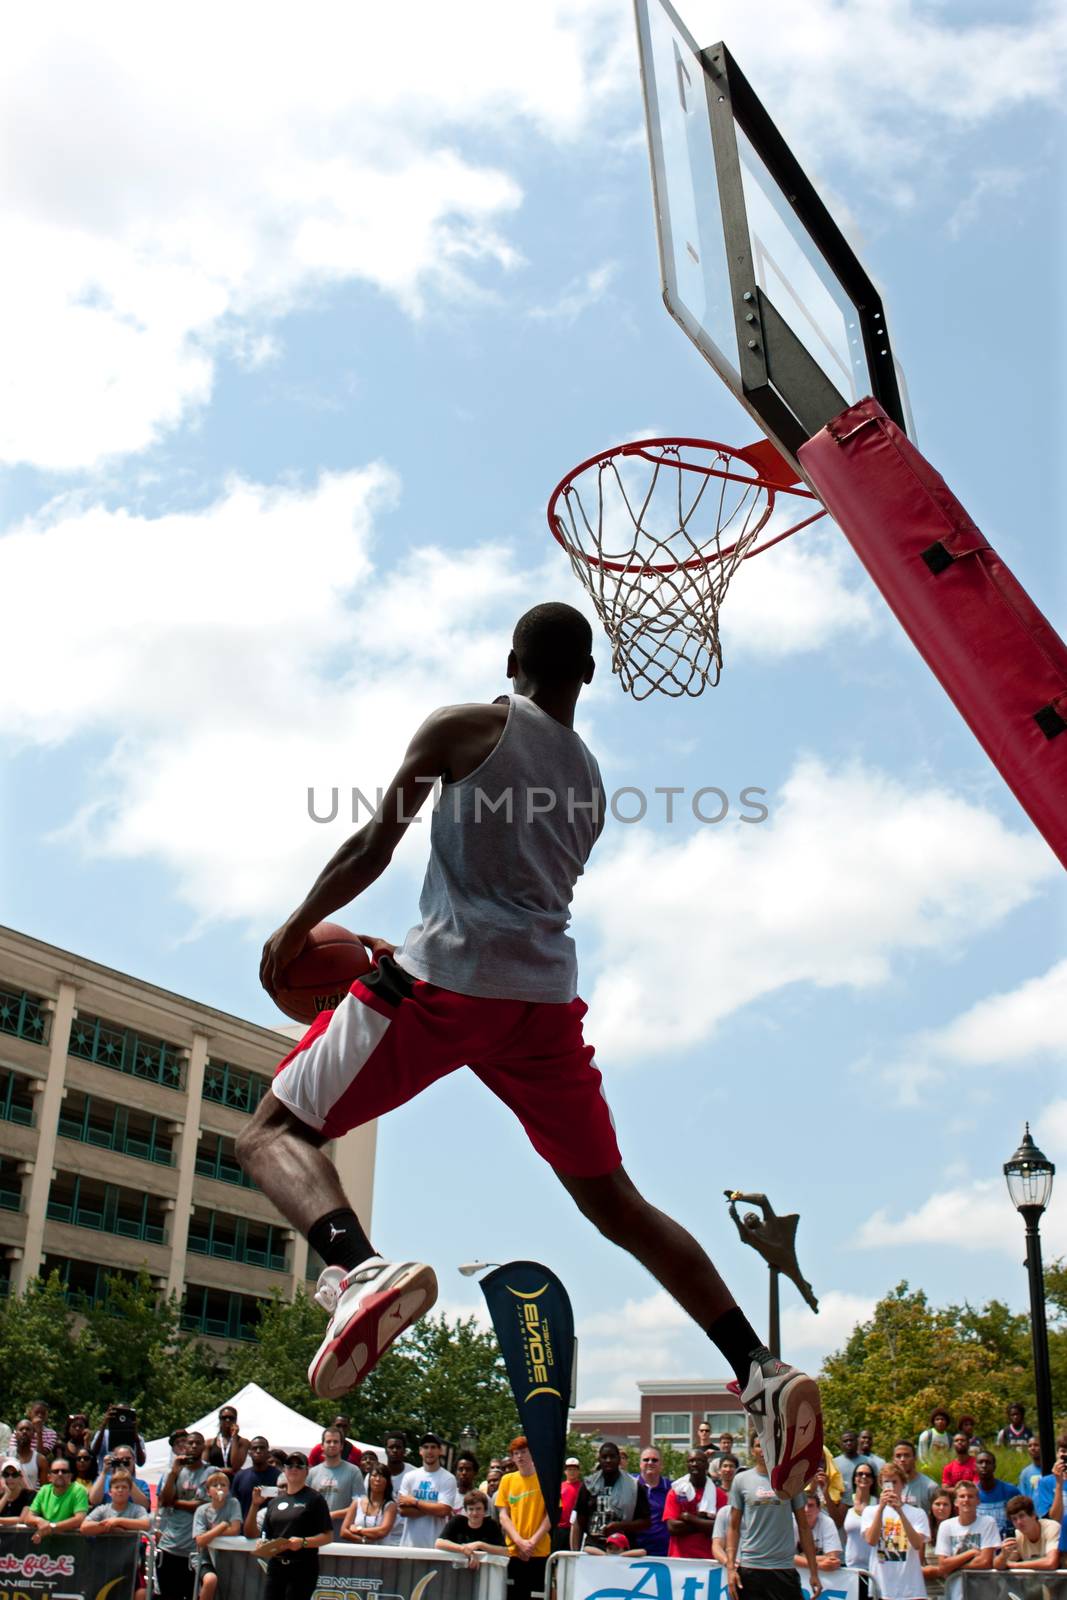 Athens, GA, USA - August 24, 2013:  A young man jumps high attempting a reverse dunk in the slam dunk competition of a 3-on-3 basketball tournament held in the streets of downtown Athens.